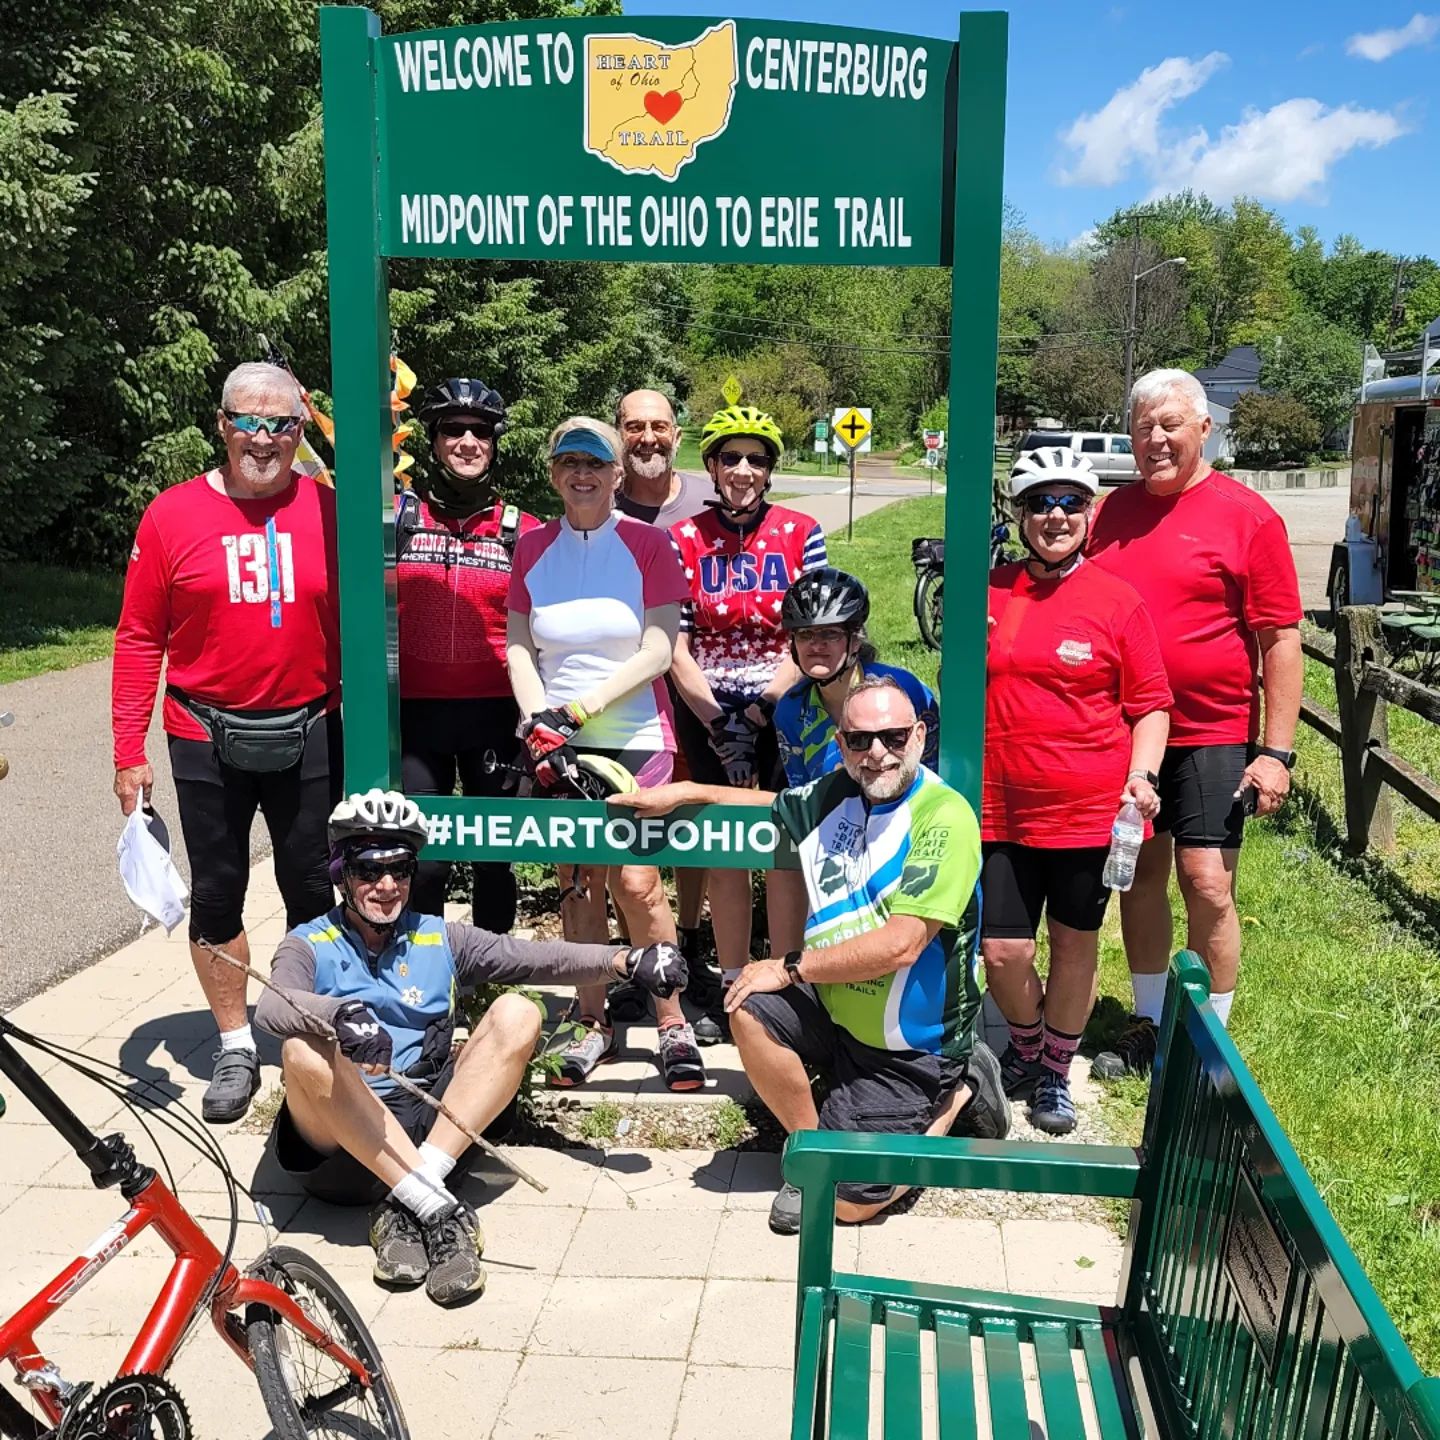 The Outdoor Pursuits Ohio to Erie Trail tour passed through the midpoint of the OTET at Centerburg today. They are halfway to Cleveland. They asked me to join them in their halfway there photo. #OH2ERIE #heartofohiotrail #centerburgohio